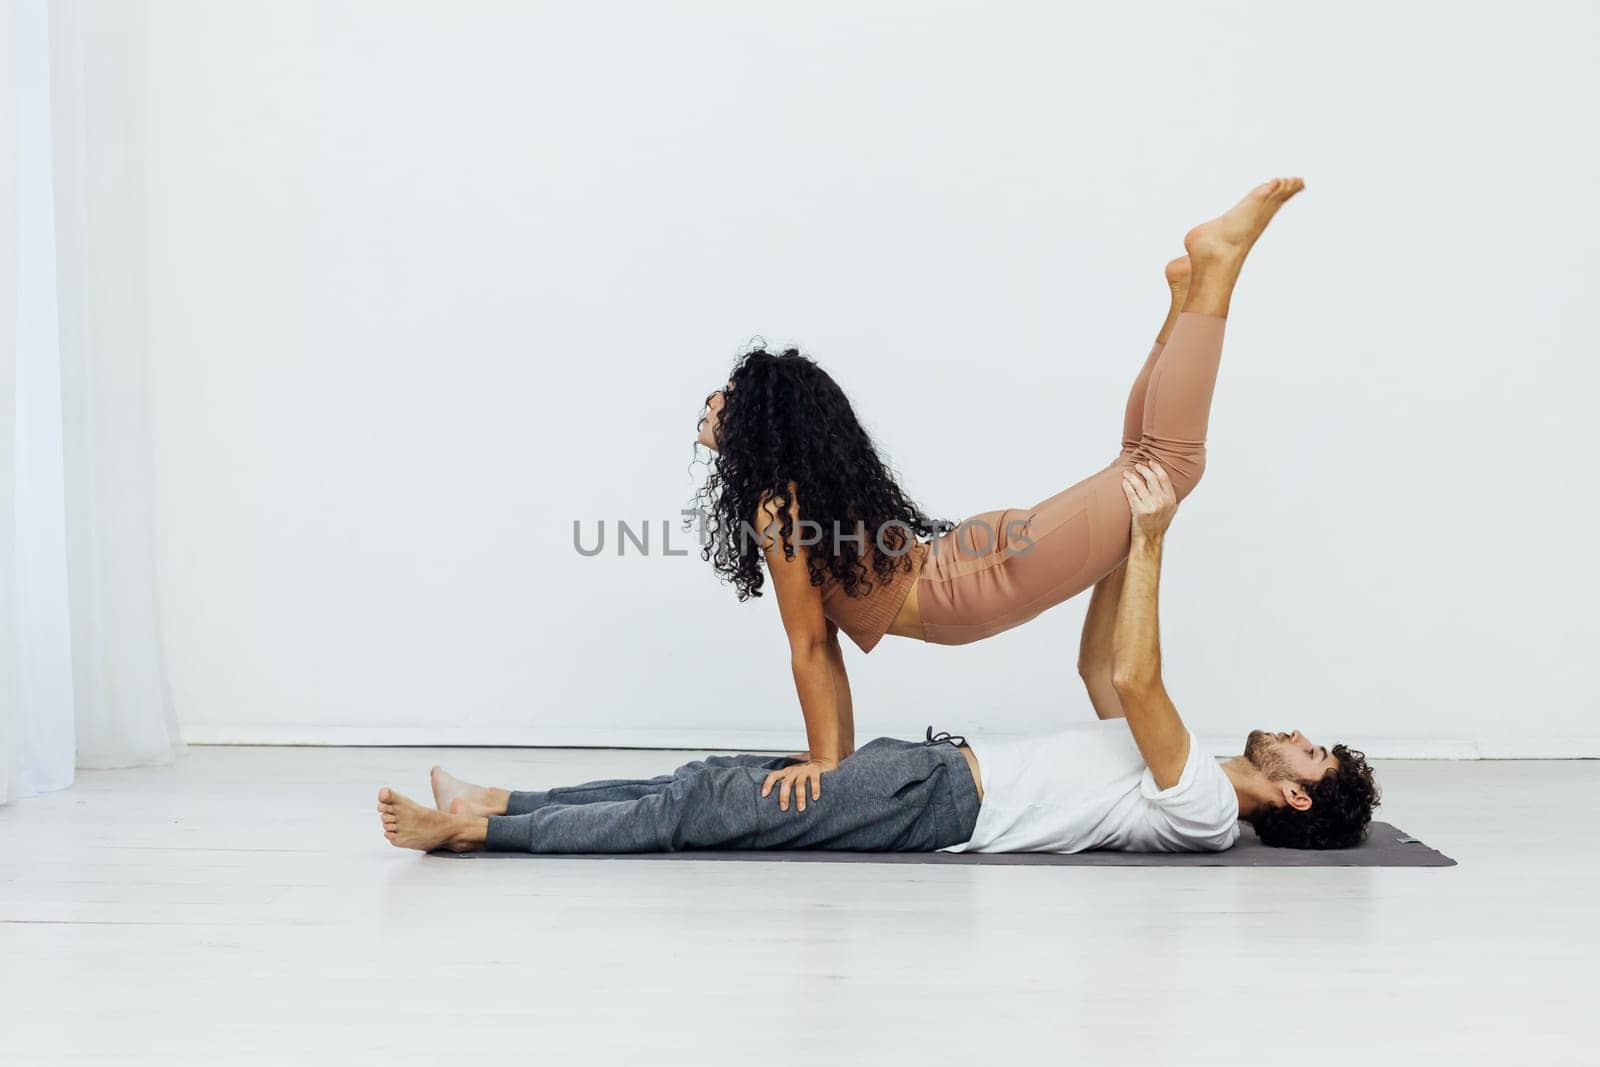 duo for yoga performance stretching spirituality training by Simakov